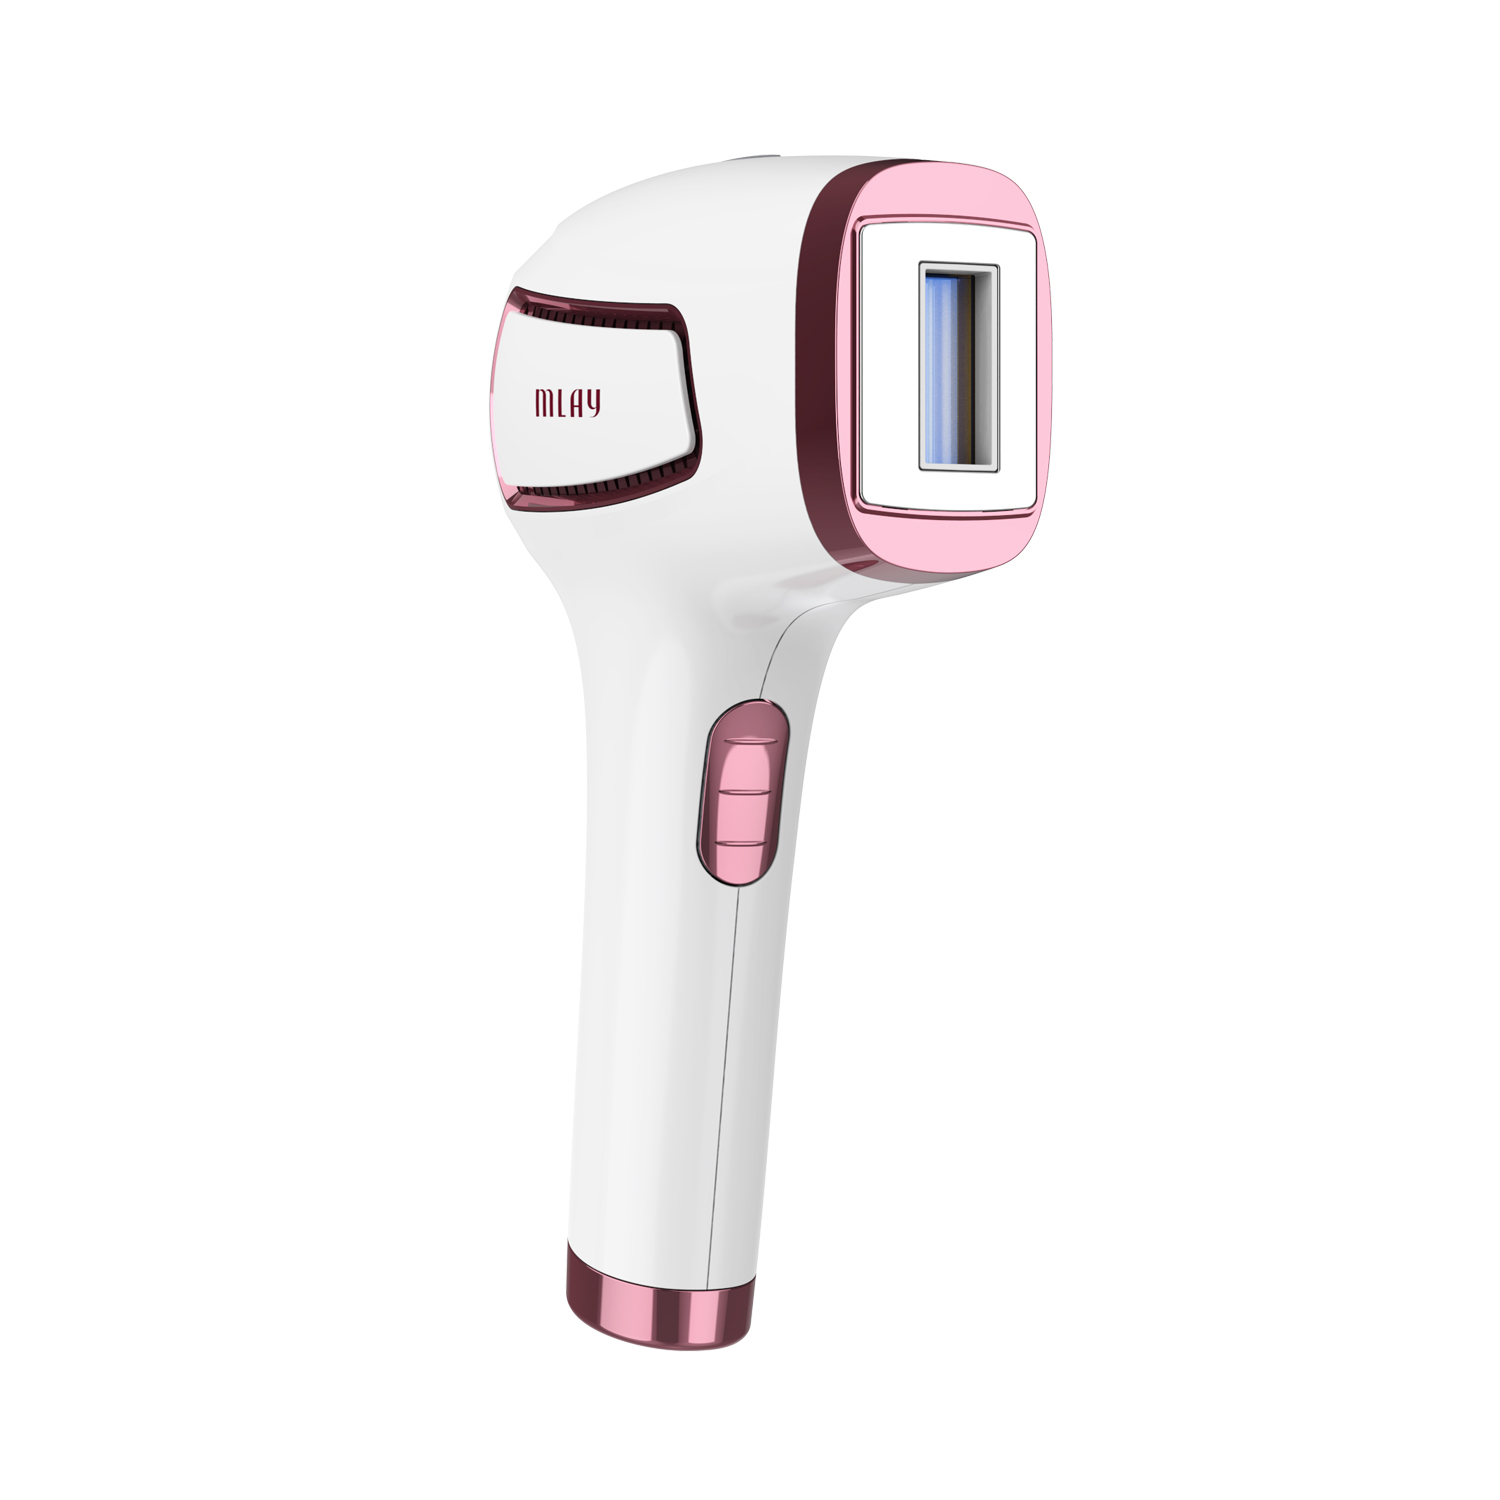  Newest Ice Cool Permanent Ipl Hair Removal Laser Ipl Ice Cooling Ipl Hair Skin Acne Cool Ice Home Device